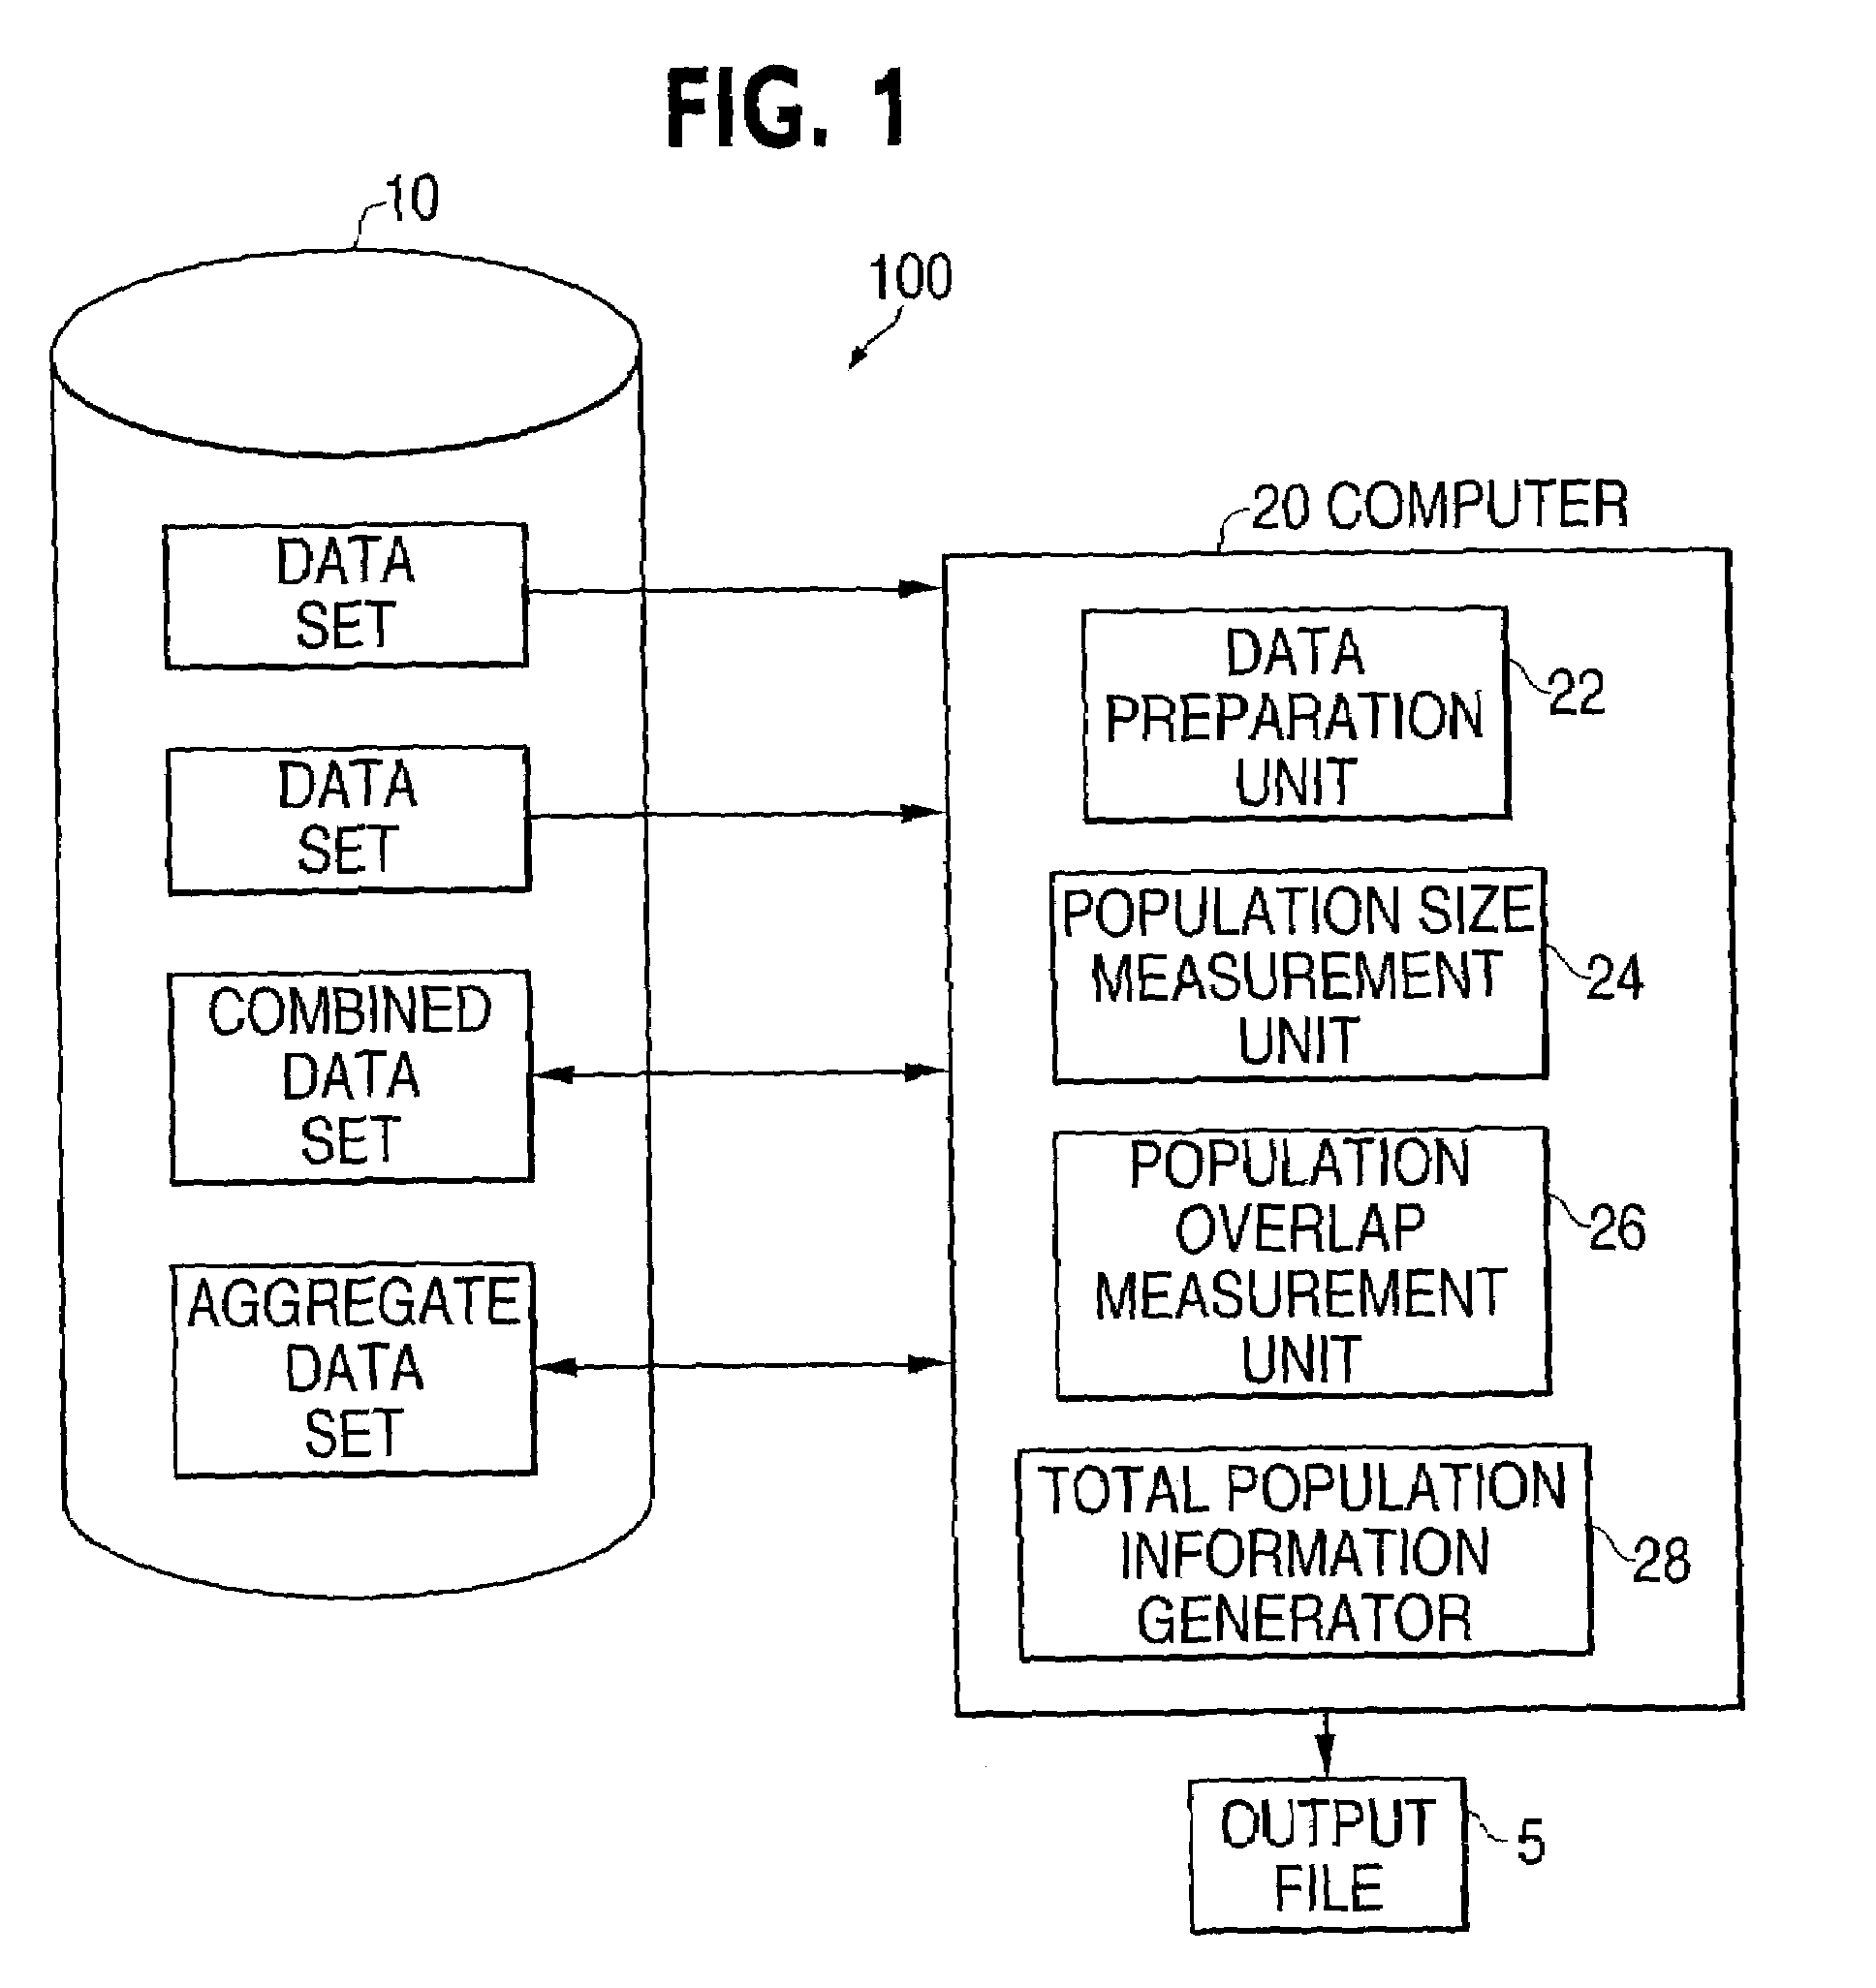 Apparatus and method for probabilistic population size and overlap determination, remote processing of private data and probabilistic population size and overlap determination for three or more data sets